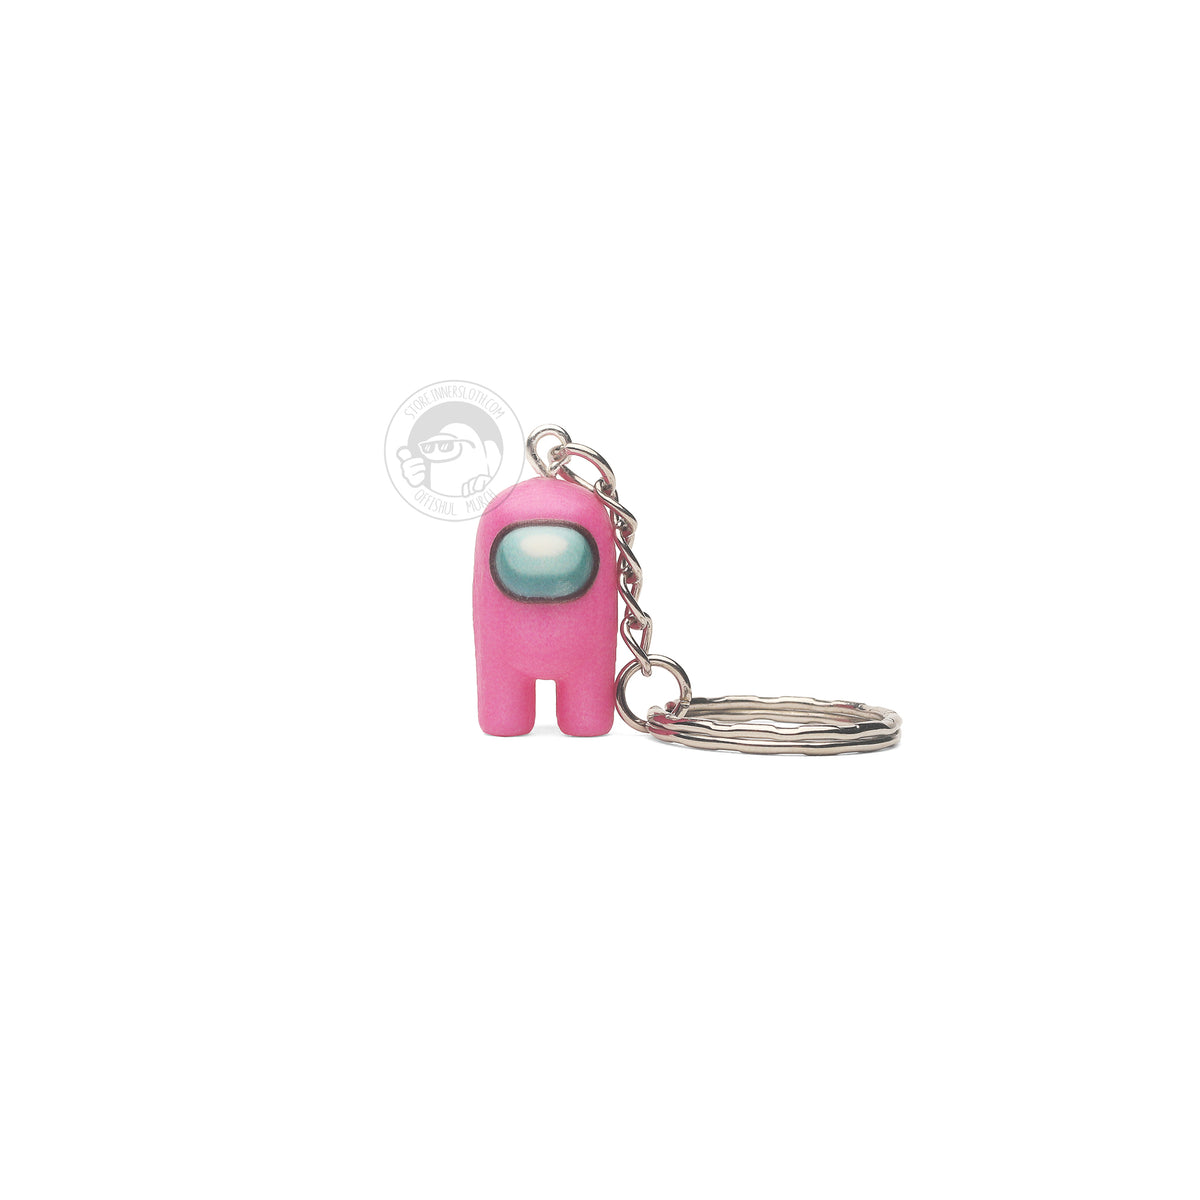 A product photo of the Among Us: Crewmate Keychain by Objex Unlimited Inc. in pink. It is standing, and a silver keychain rests beside it.